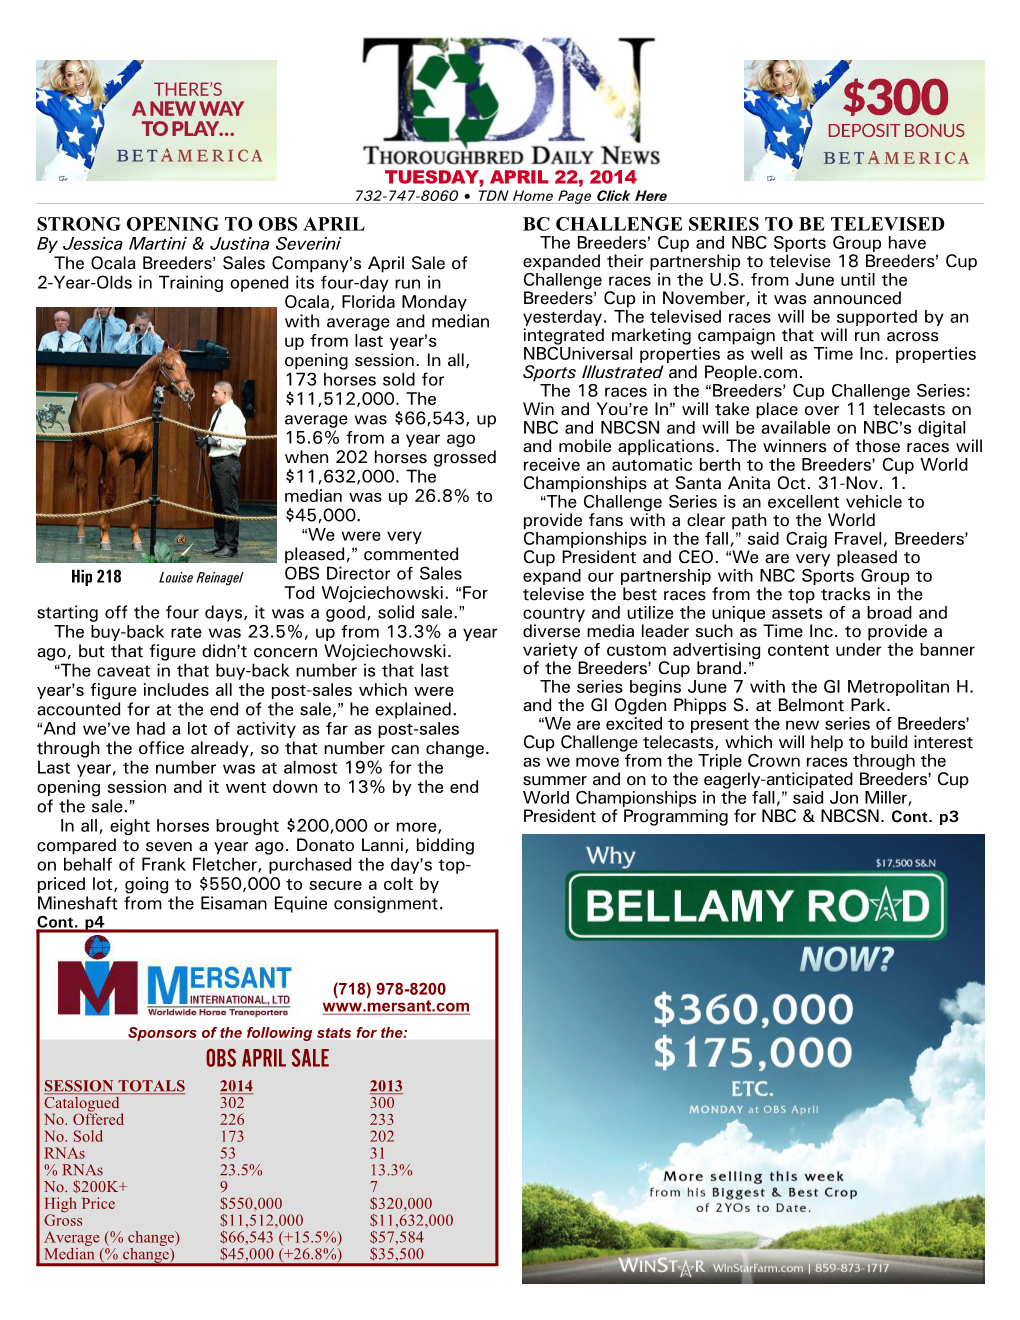 OBS APRIL SALE SESSION TOTALS 2014 2013 Catalogued 302 300 No